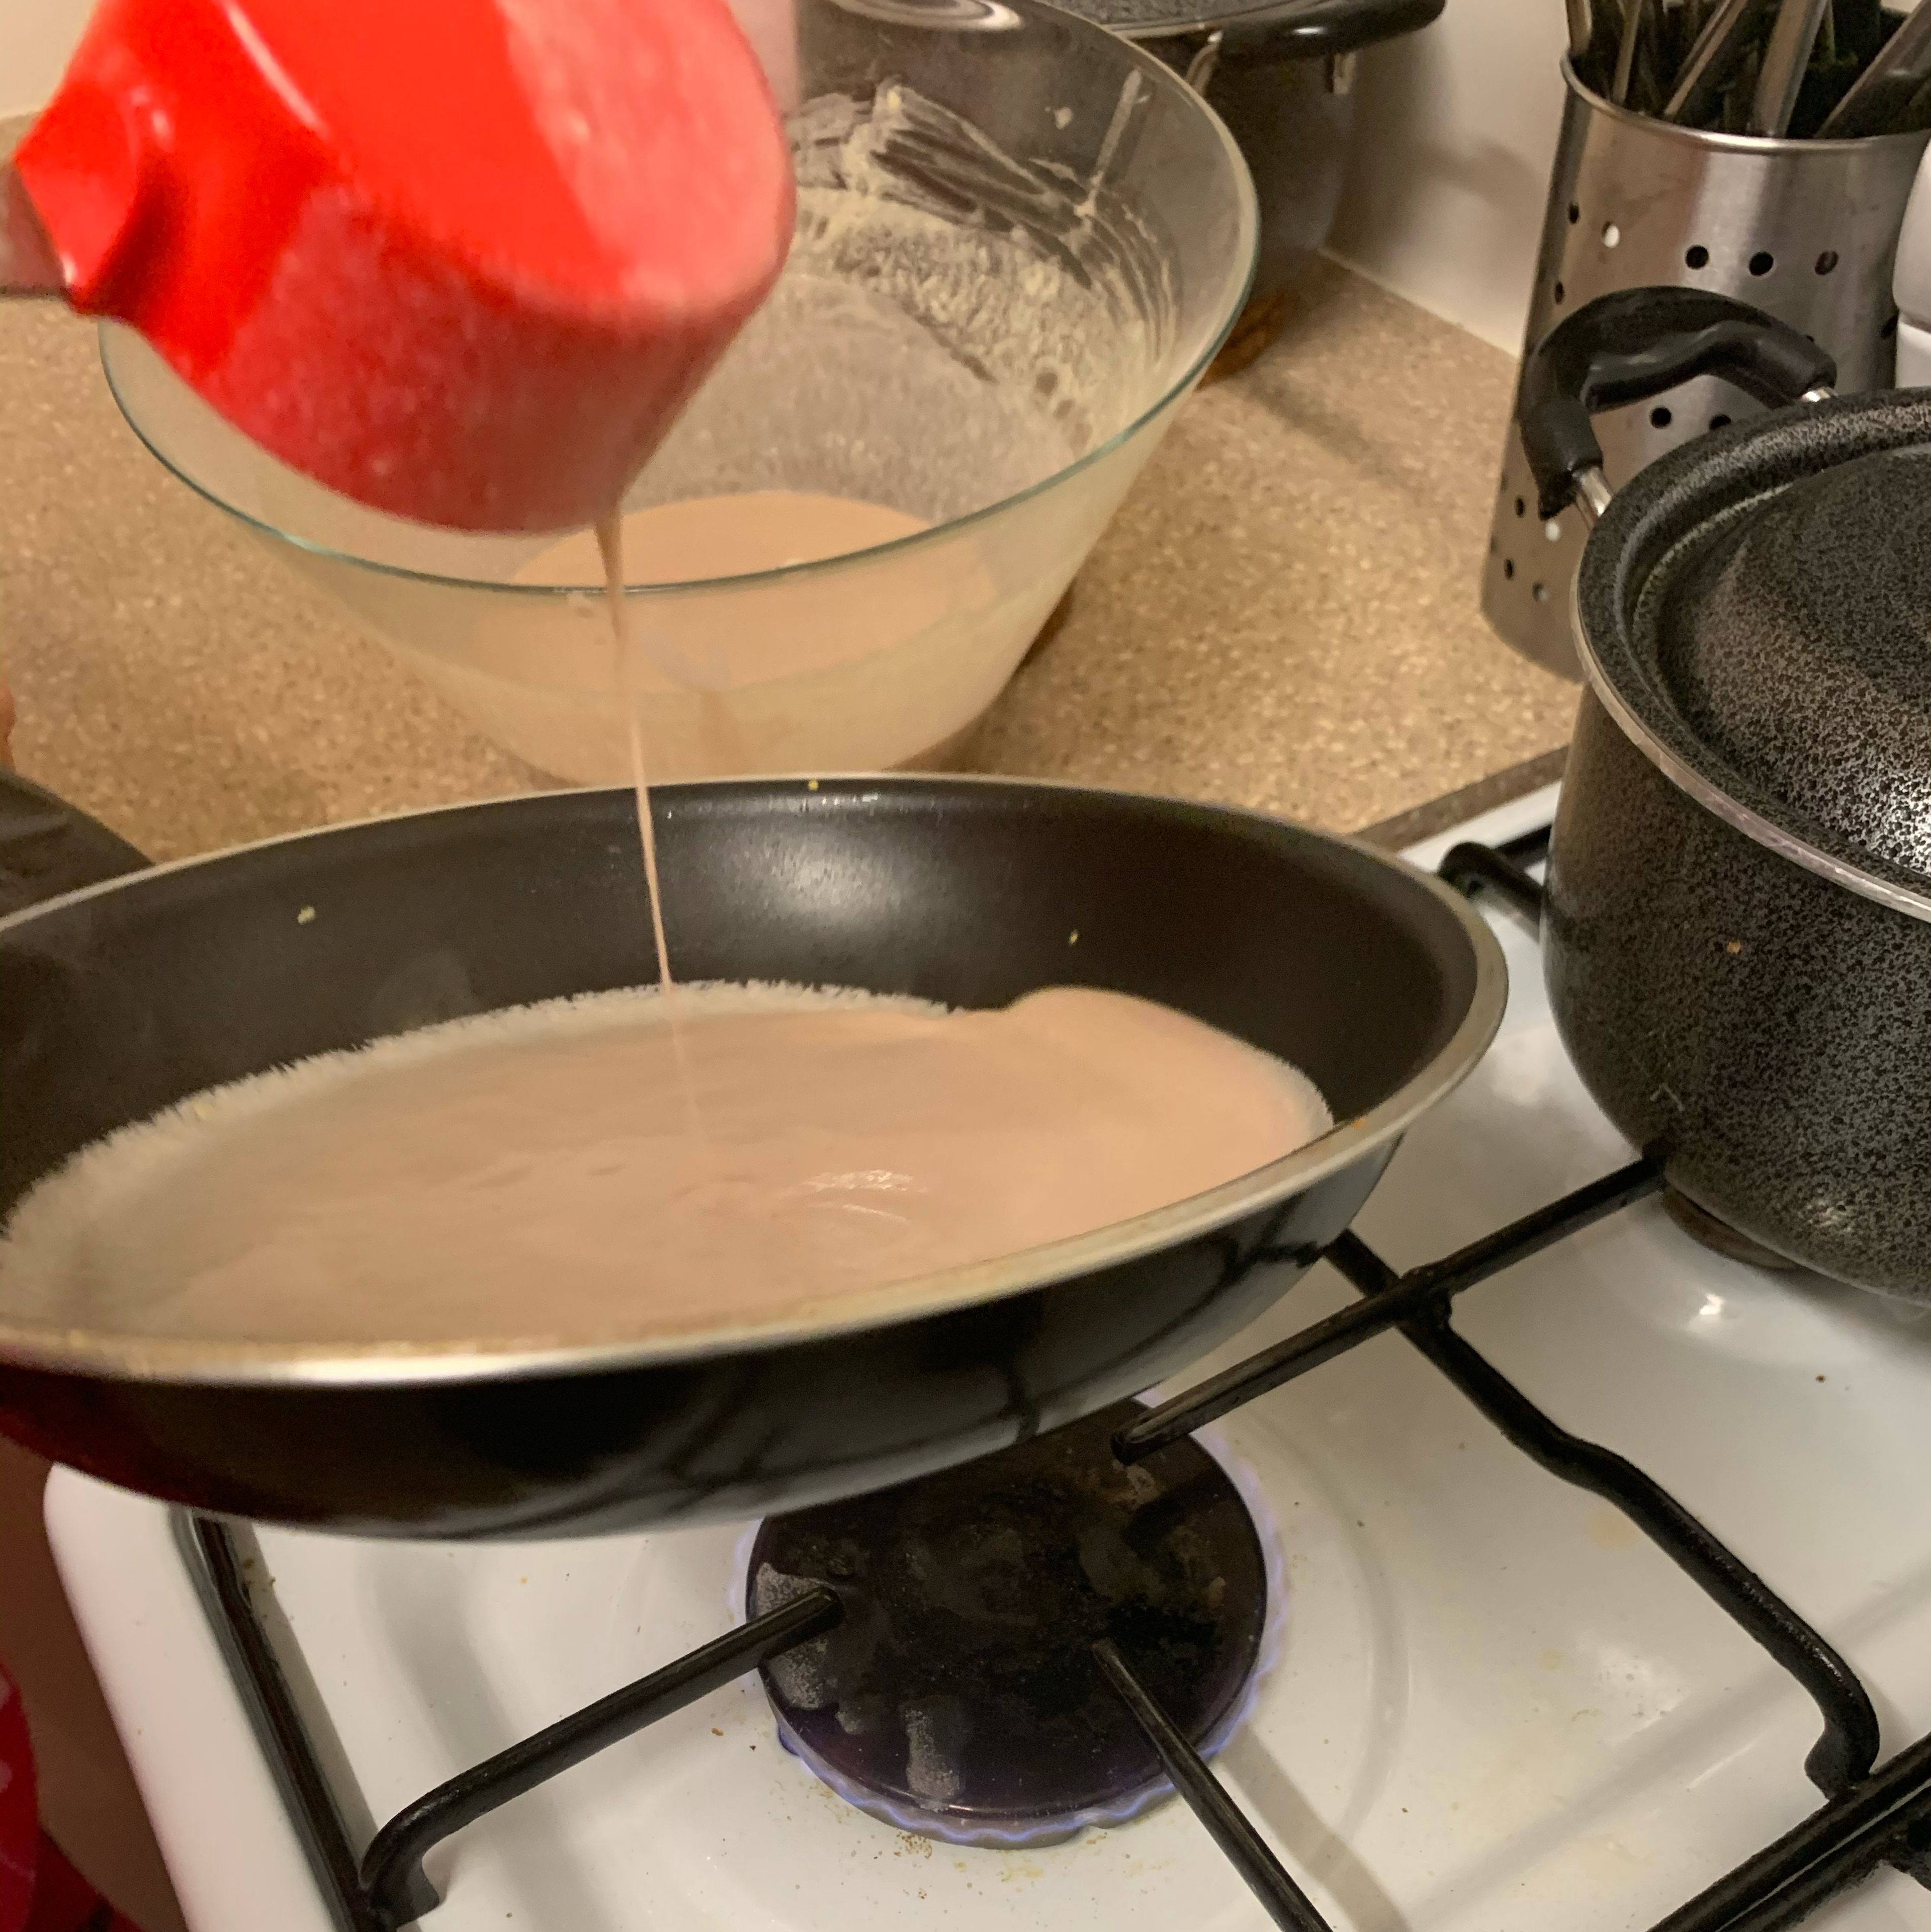 Use a non-stick pan on a low to medium heat until it’s hot before pouring in the batter. Use about 2/3 batter in a ￼1/3 cup measurement for each crepe